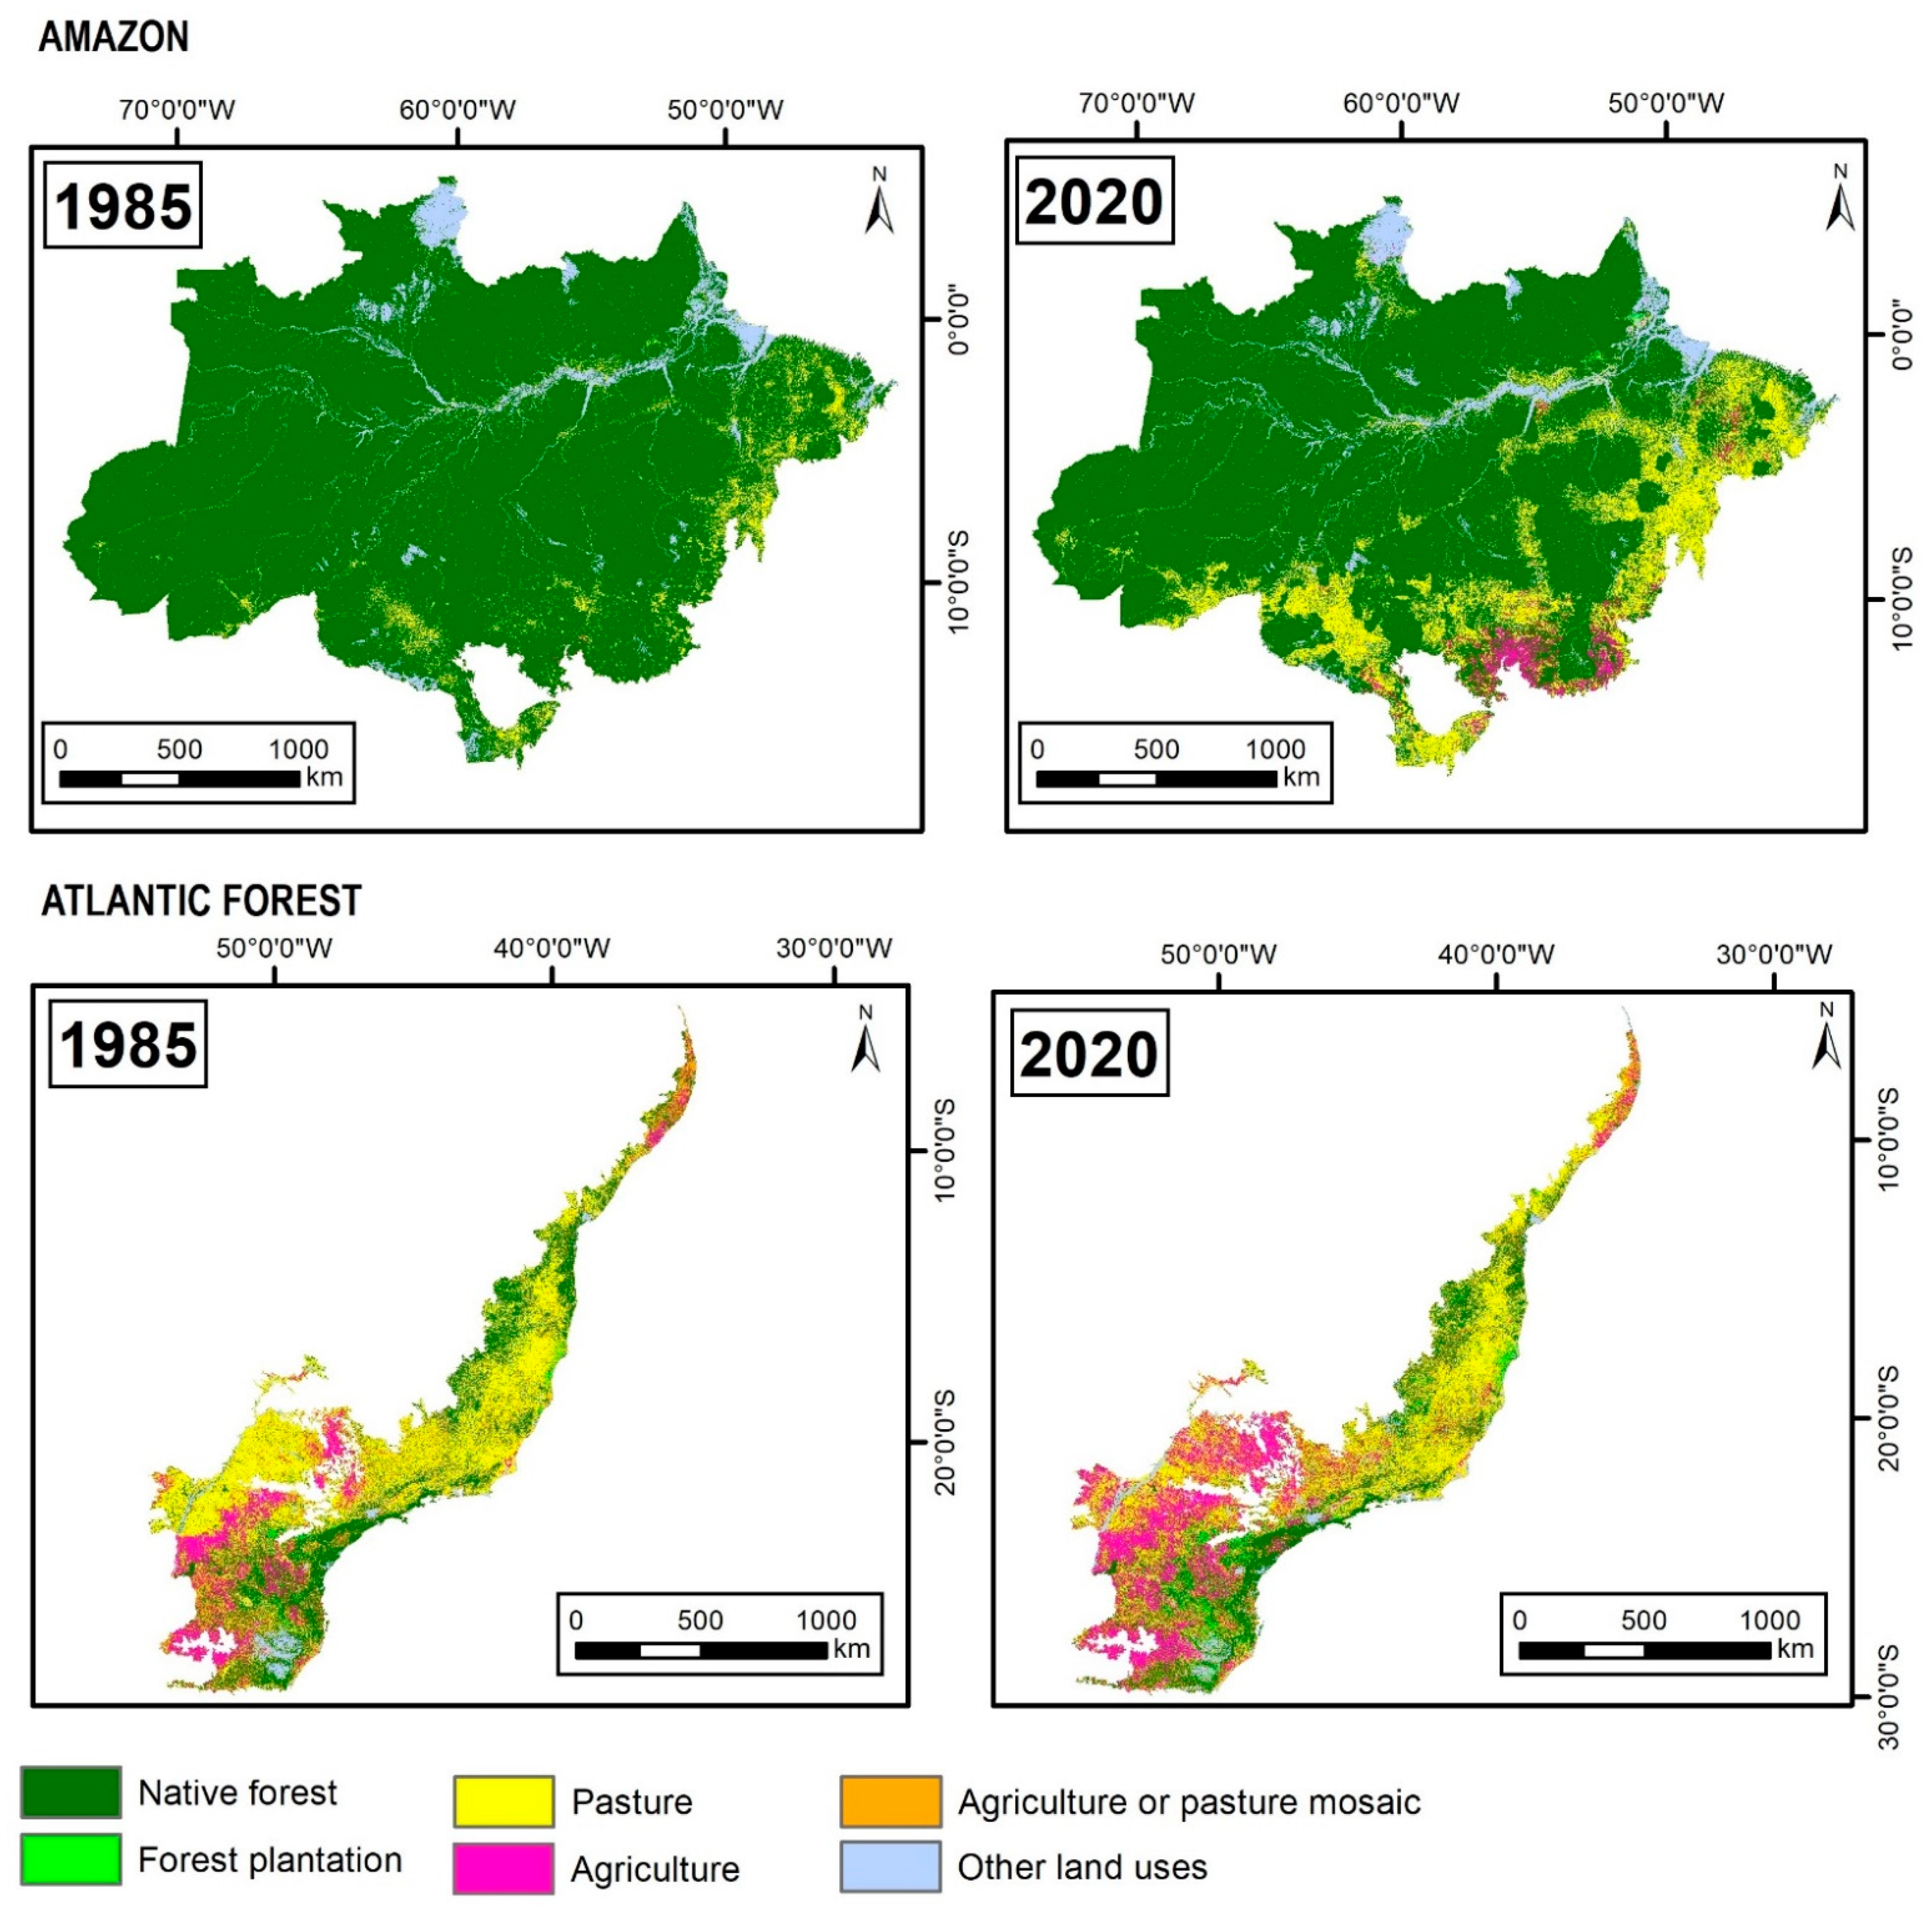 Sustainability | Free Full-Text | Land Use, Land Cover Change and  Sustainable Intensification of Agriculture and Livestock in the Amazon and  the Atlantic Forest in Brazil